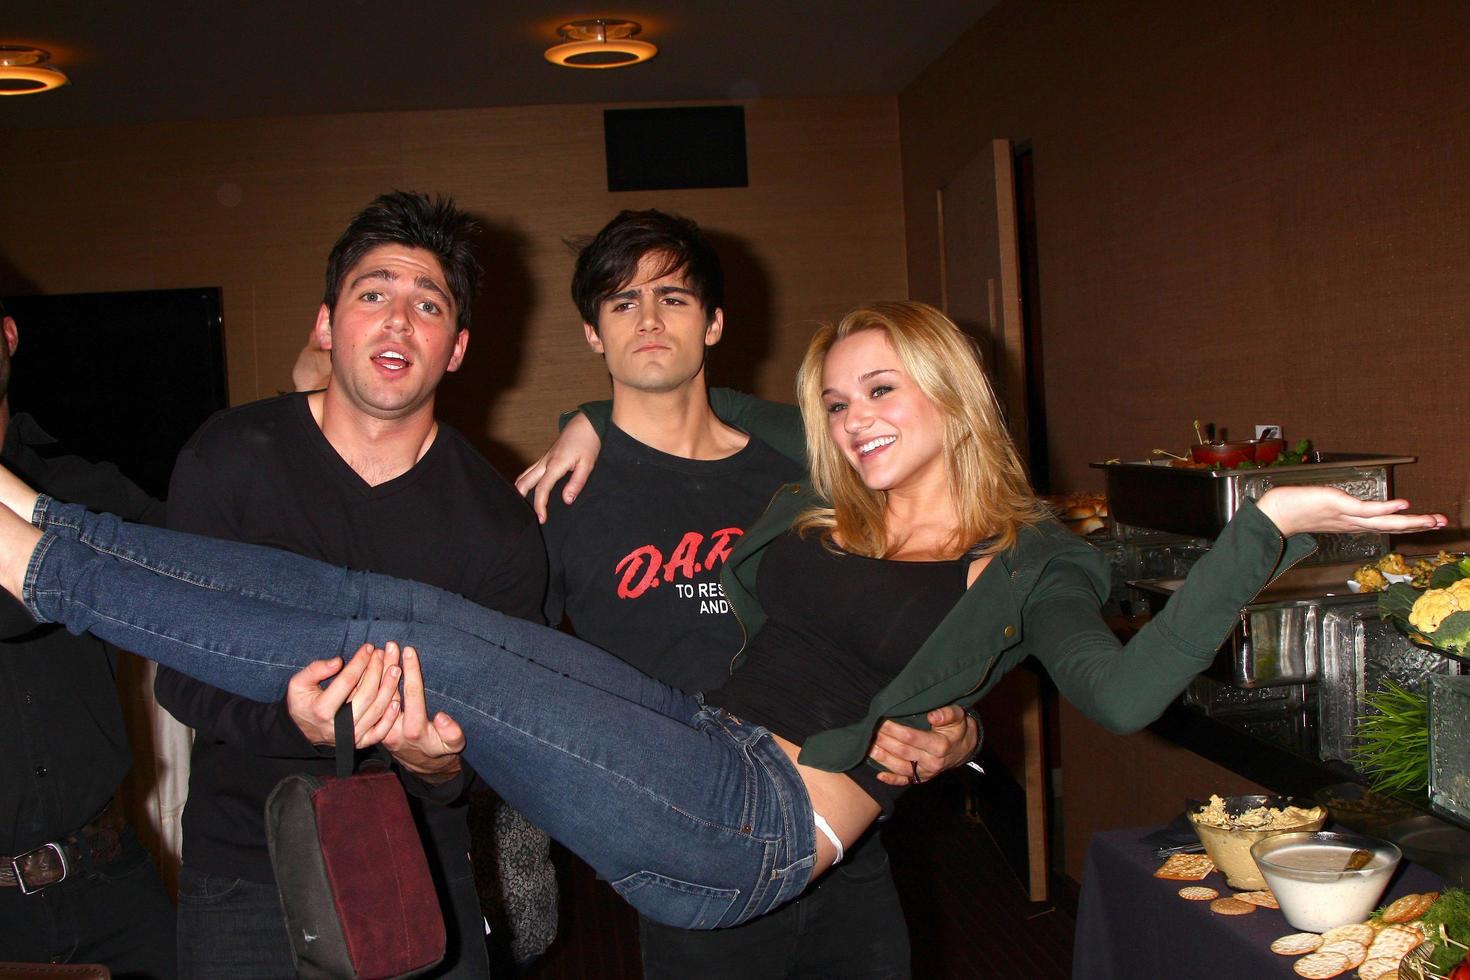 LOS ANGELES  FEB 27 - Robert Adamson, Max Ehrich, Hunter King at the Hot New Faces of the Young and the Restless press event at the CBS Television City on February 27, 2013 in Los Angeles, CA photo